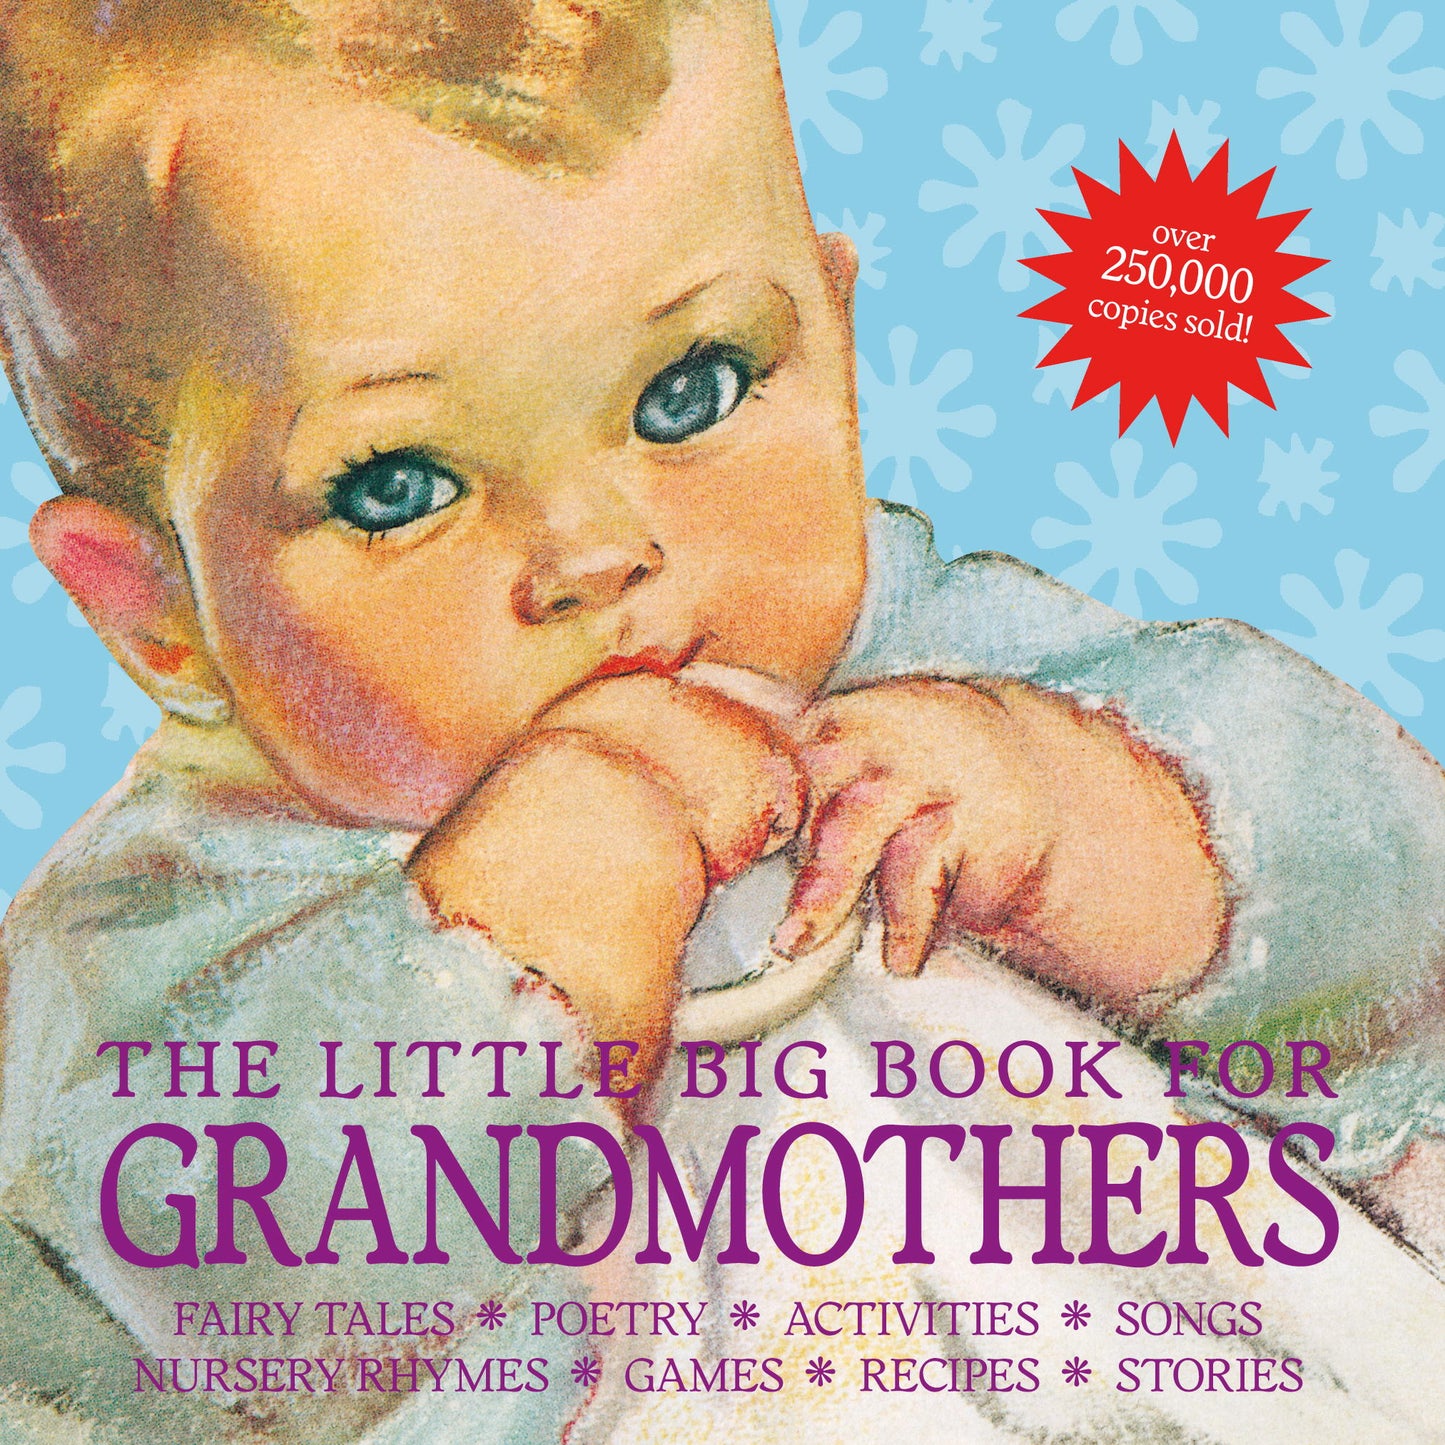 The Little Big Book for Grandmothers, revised edition